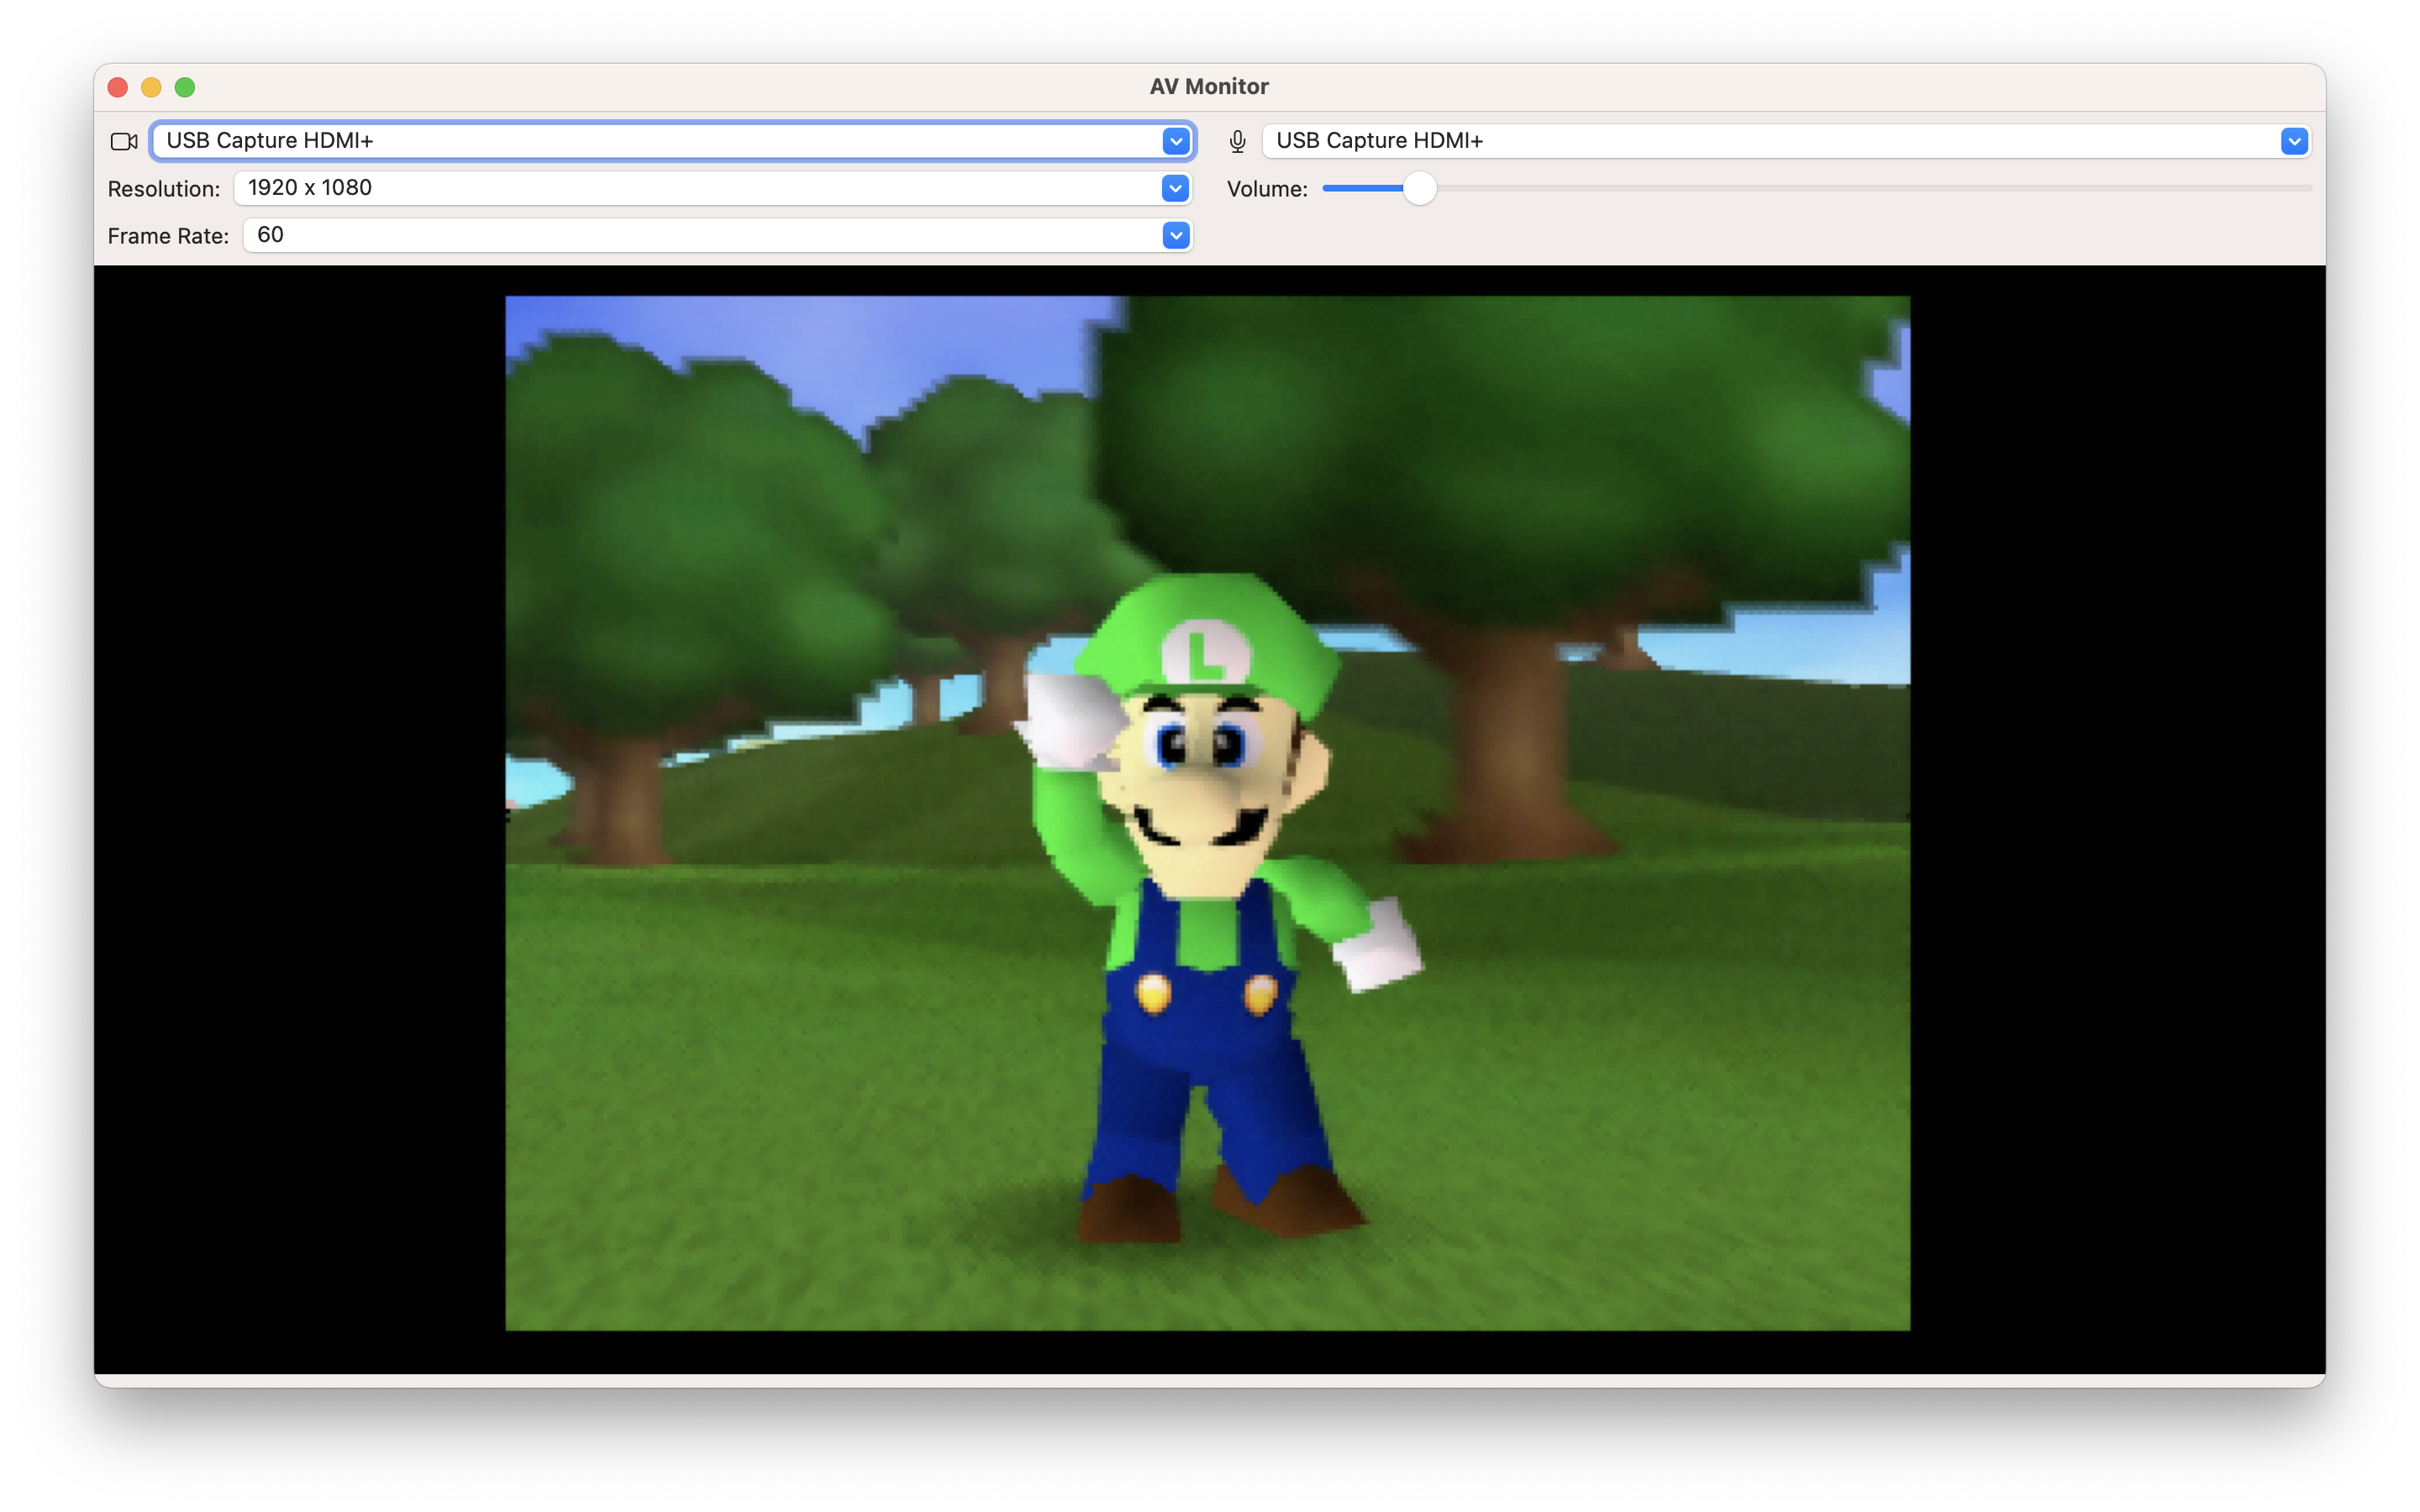 AV Monitor window with the Mario Golf 64 Intro Screen visible at 1920x1080 resolution, 60 frames per second, and audio output enabled